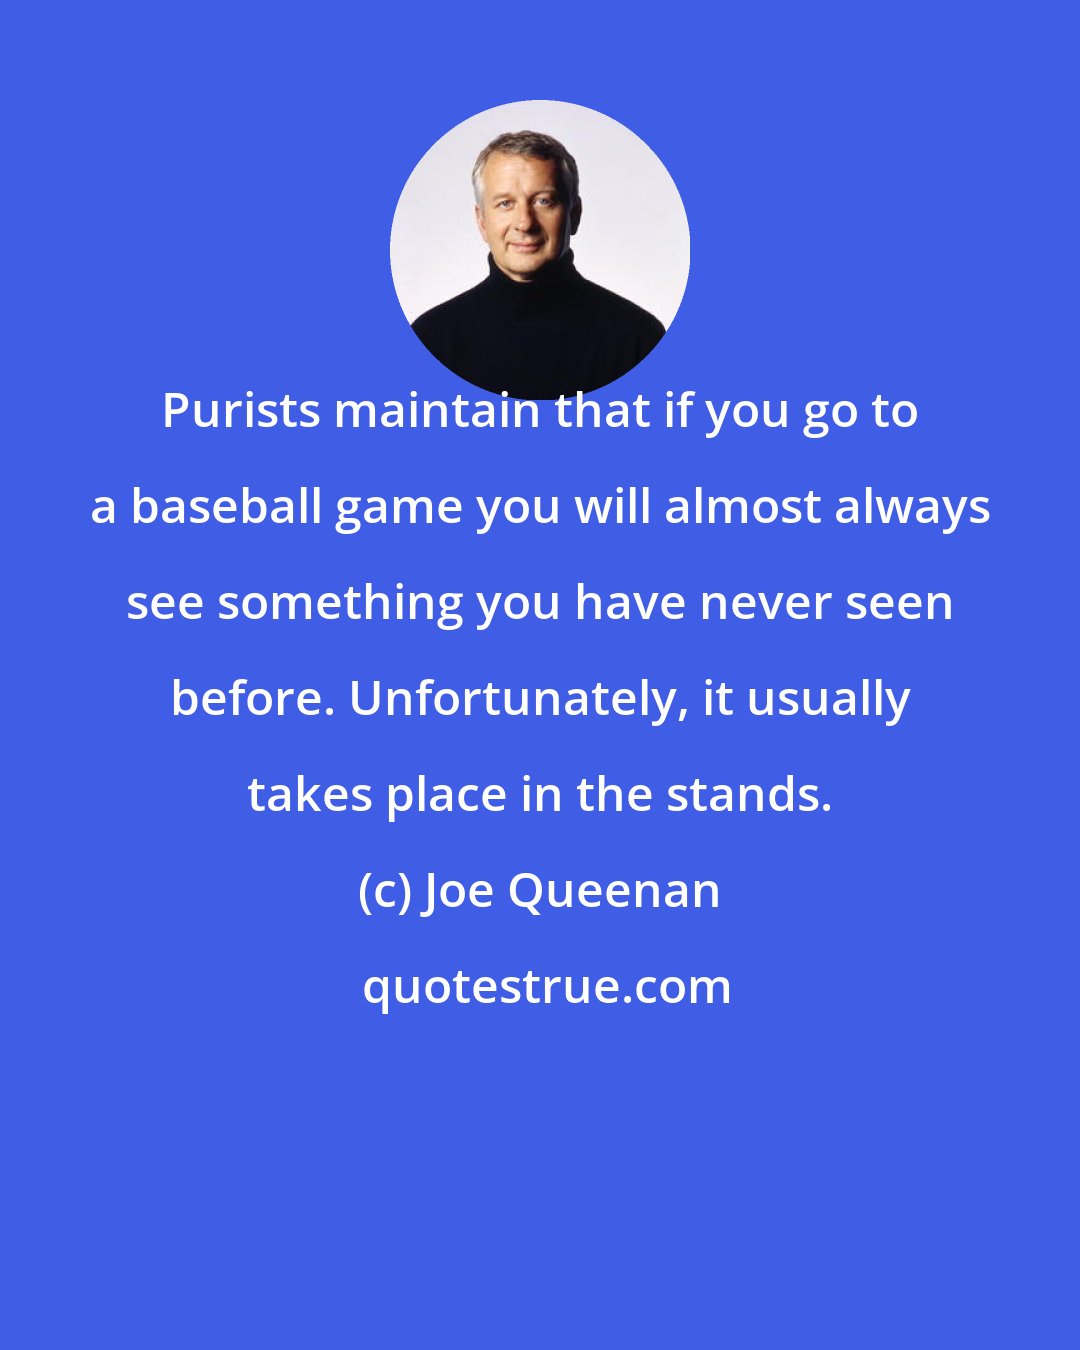 Joe Queenan: Purists maintain that if you go to a baseball game you will almost always see something you have never seen before. Unfortunately, it usually takes place in the stands.